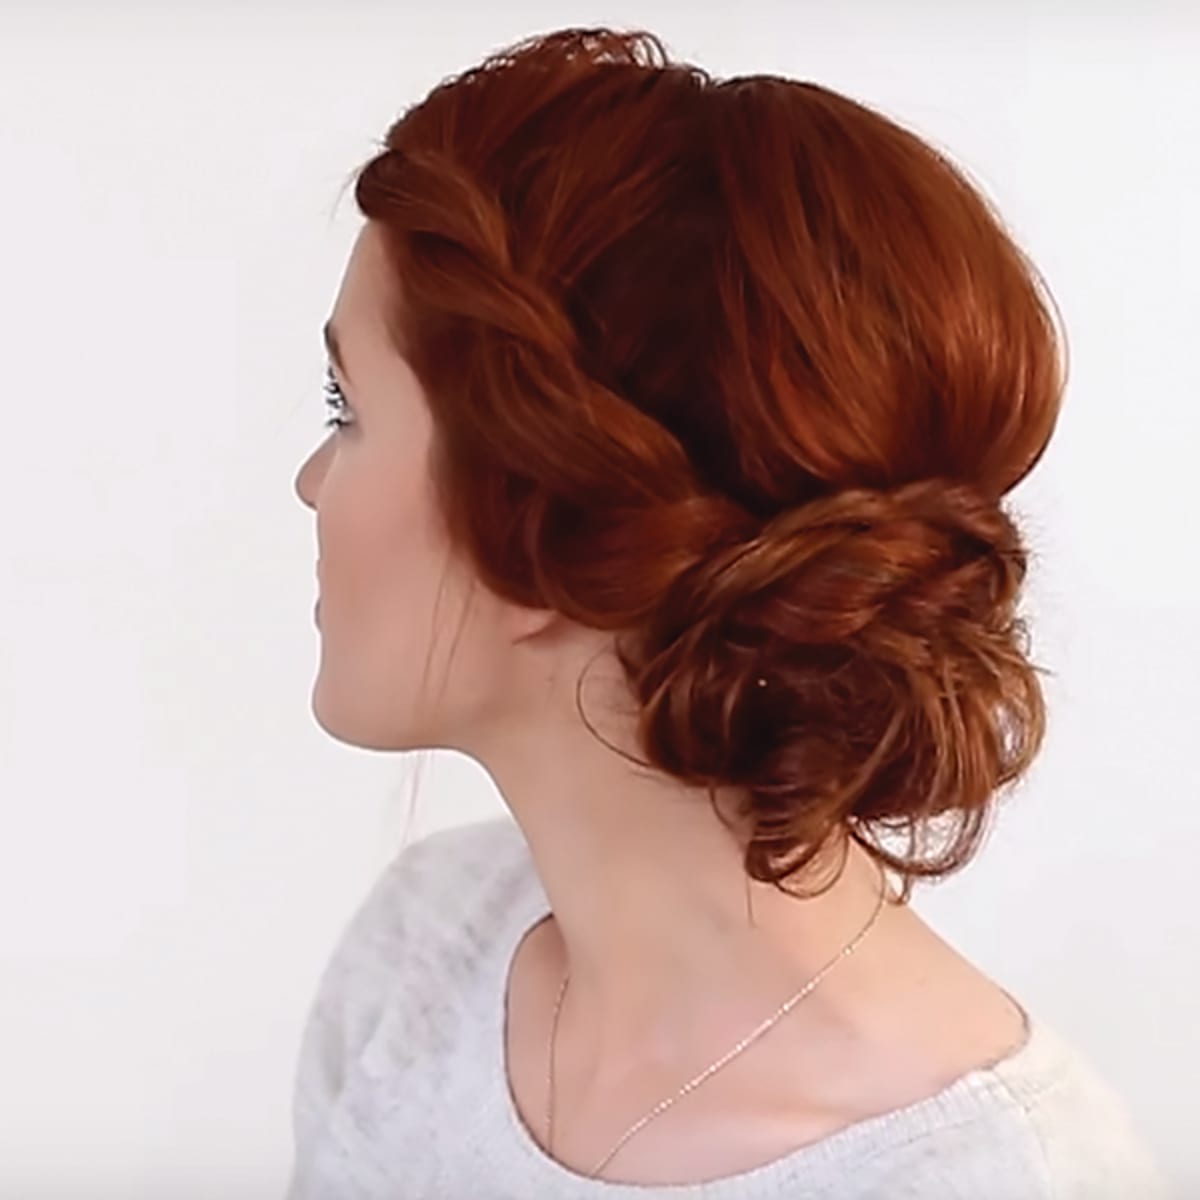 Easy Bridal Beauty Tutorials You Can Do Yourself - Verily